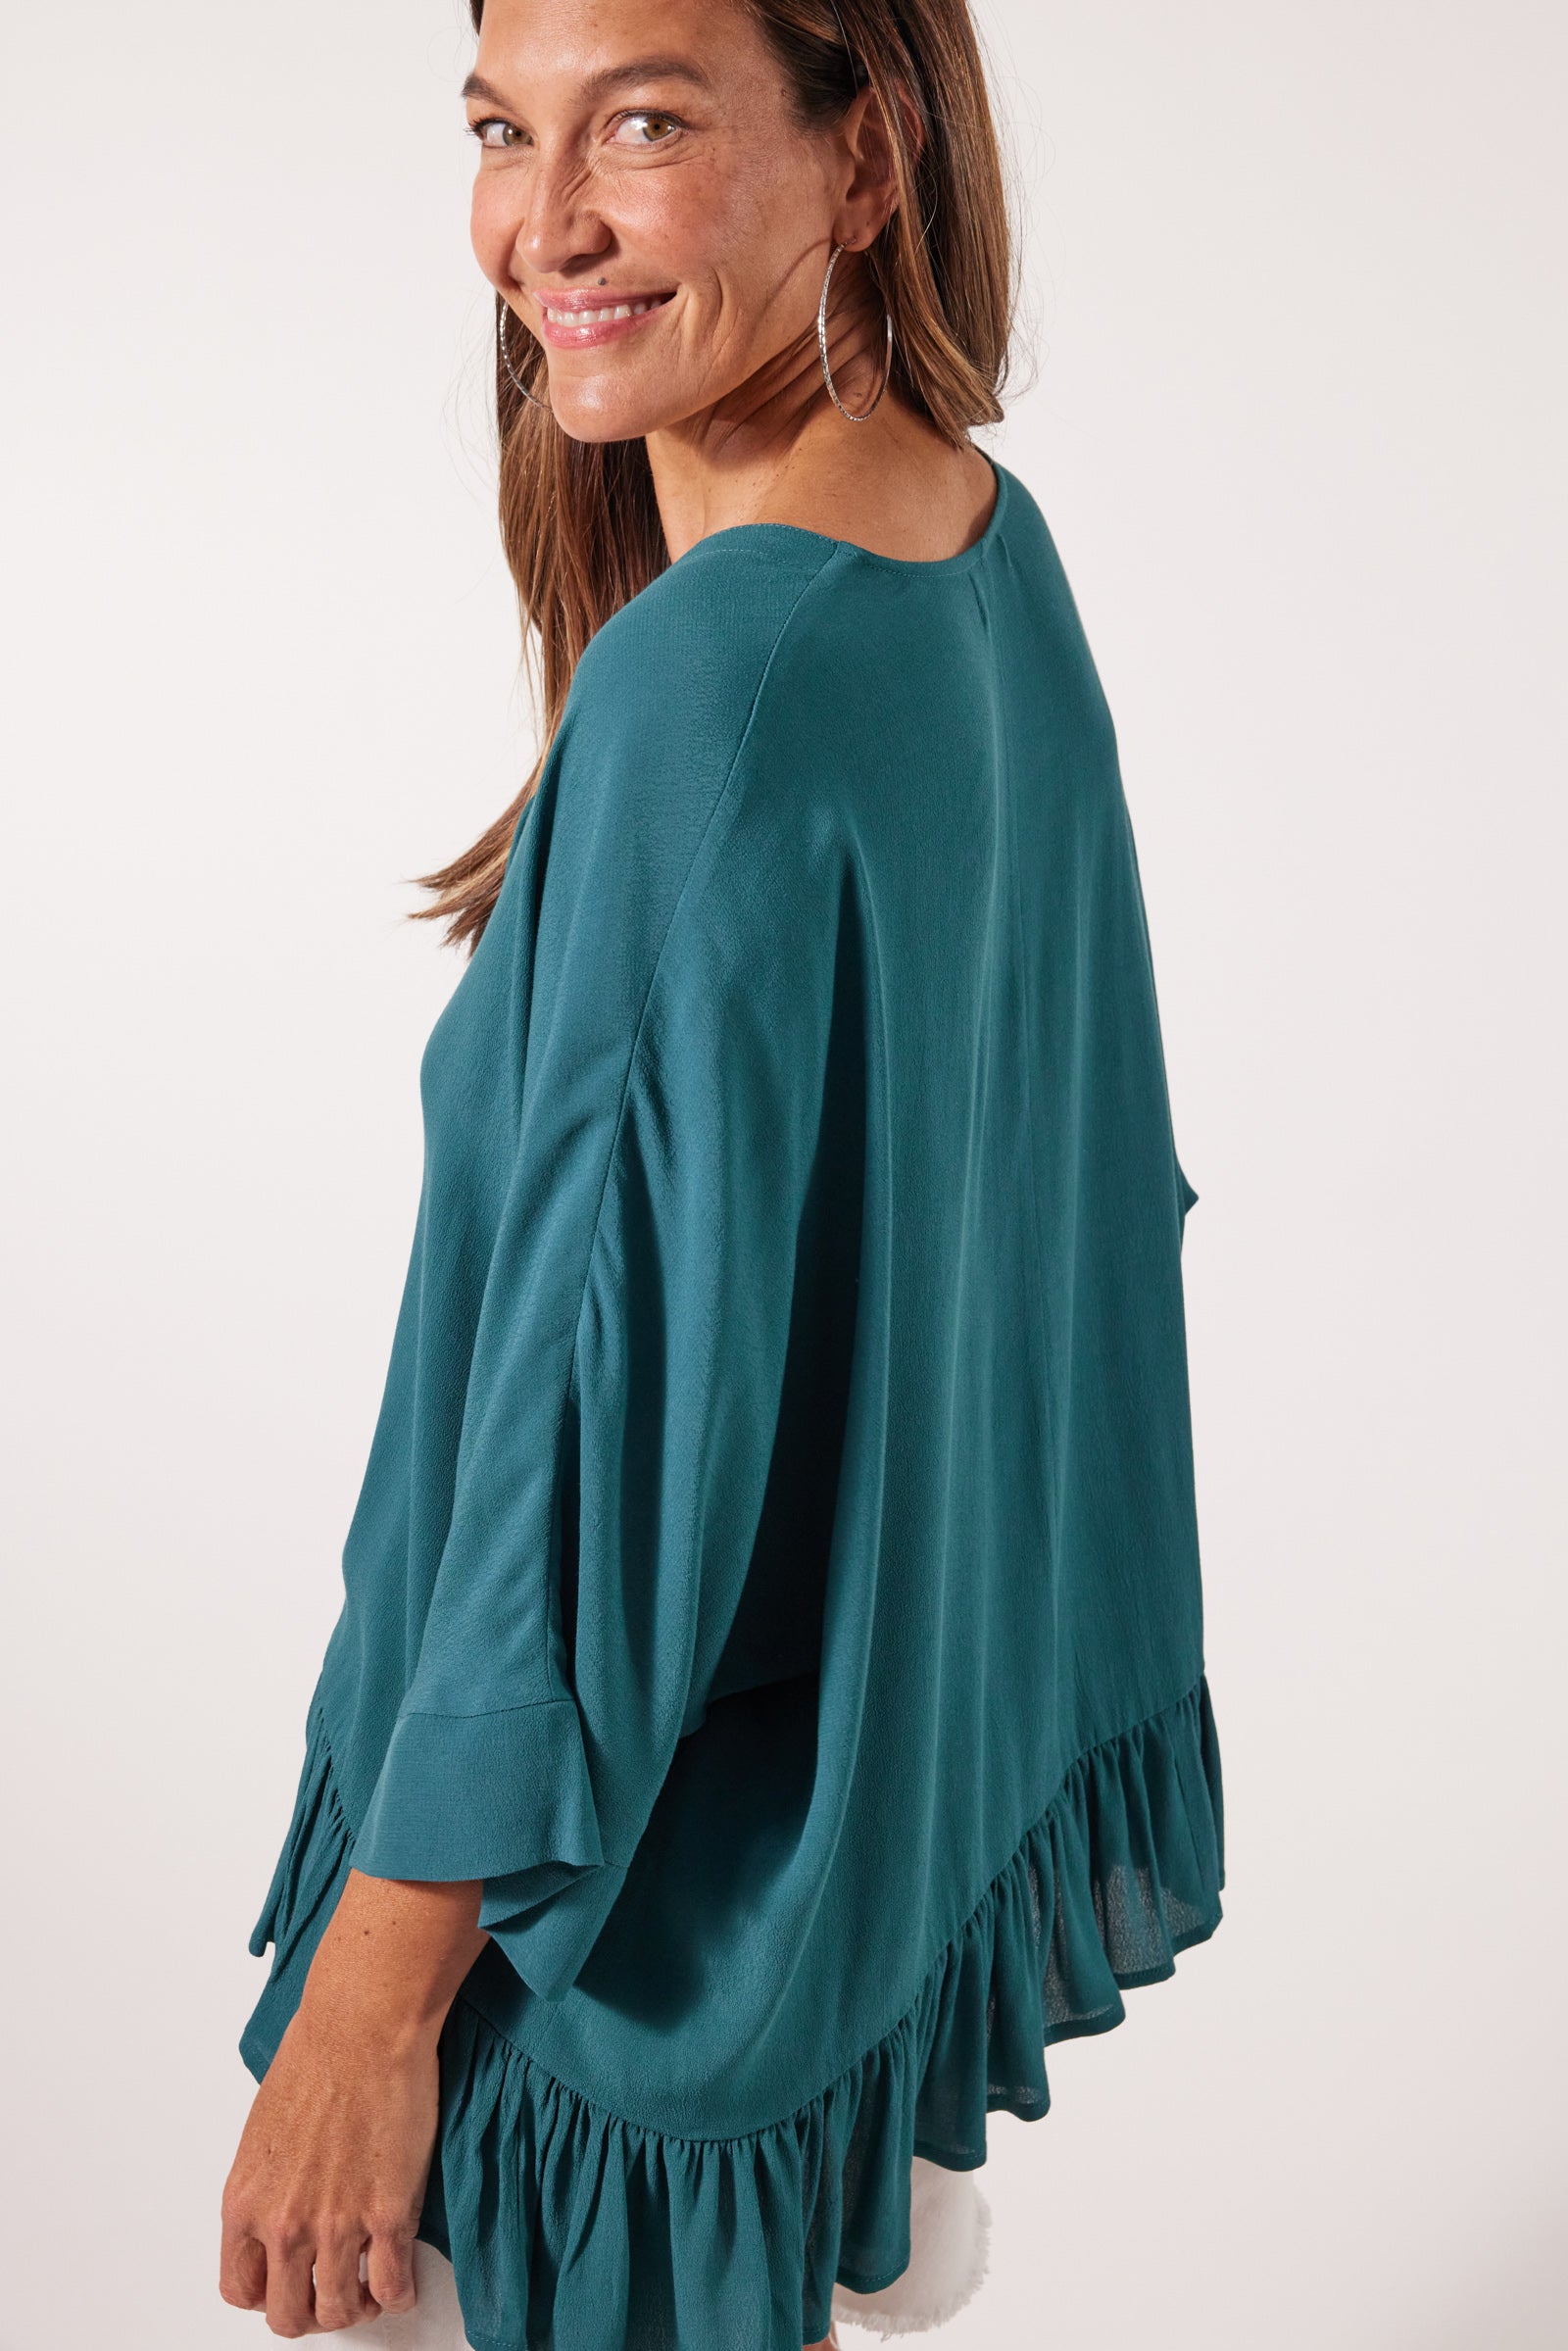 Botanical V Relax Top  - Teal - Isle of Mine Clothing - Top 3/4 Sleeve